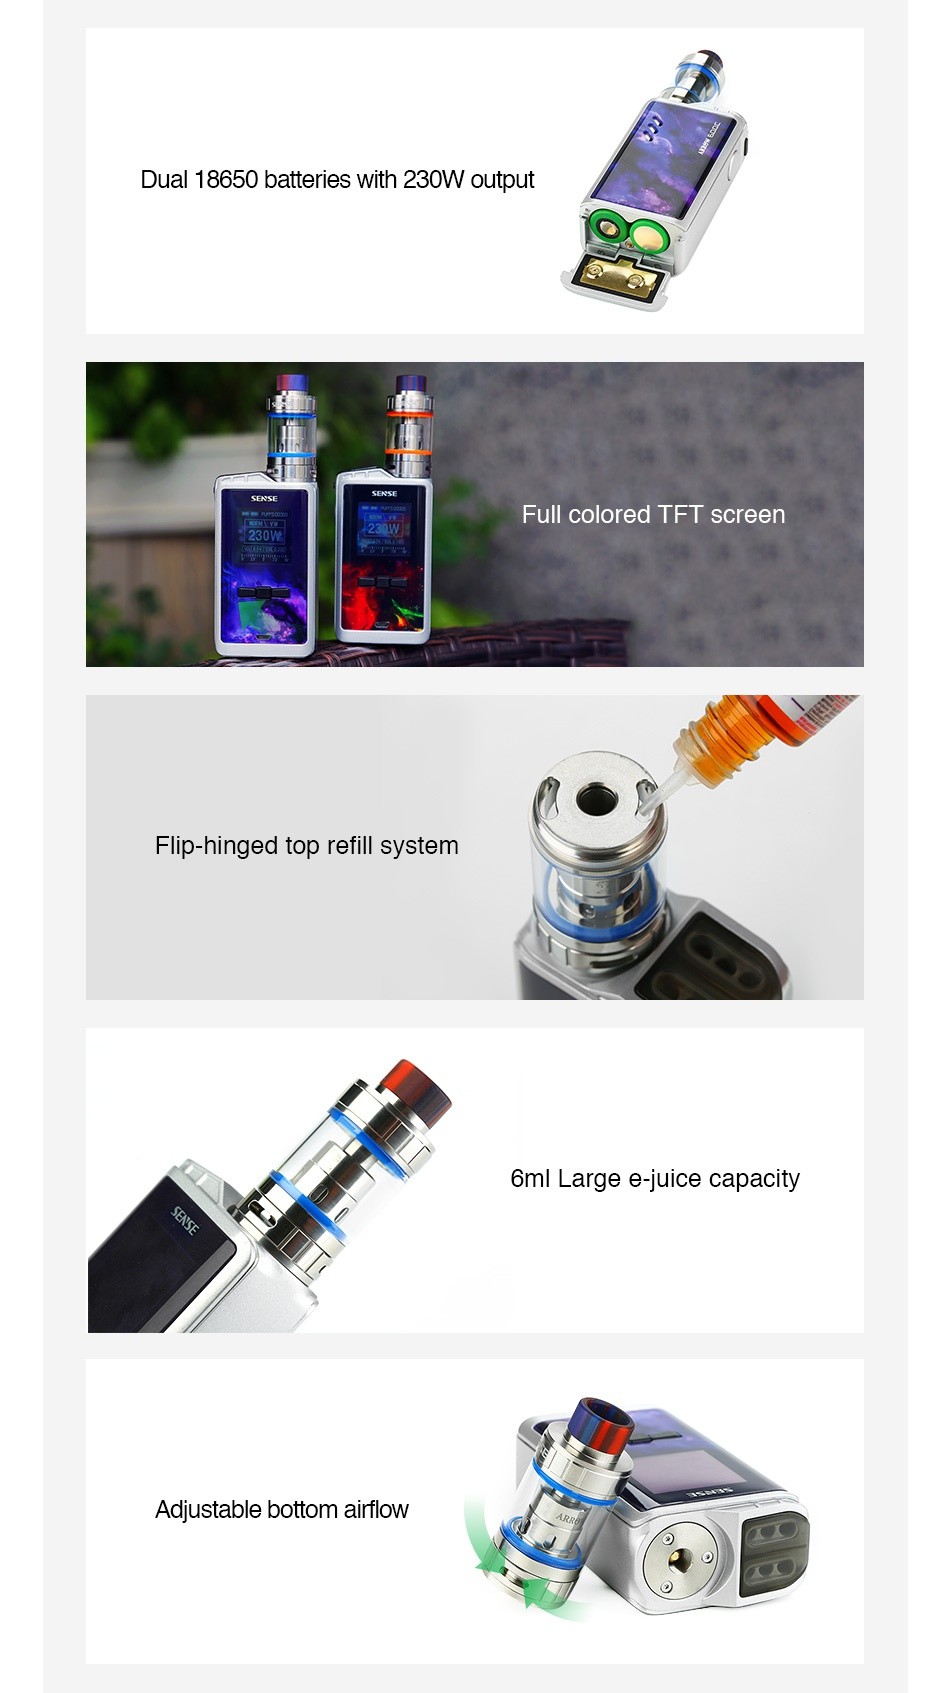 Linkedvape Classic Arrow 230W TC Kit Dual 18650 batteries with 230W output Full colored tft screen Flip hinged top refill system 6ml Large e juice capacity Adiustable bottom airflow